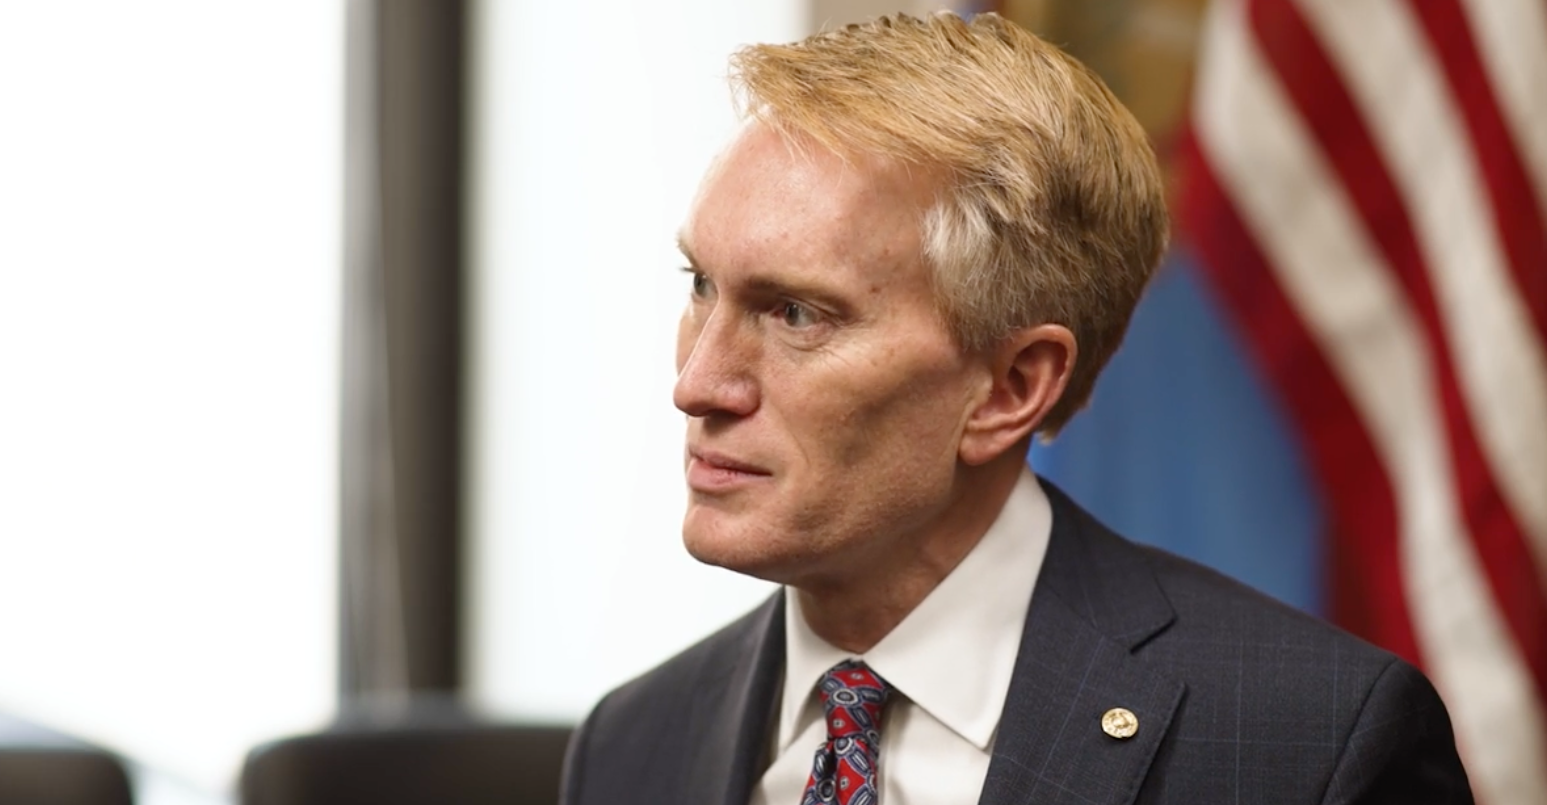 EXCLUSIVE: Sen. Lankford Lays Out How GOP Should Approach Abortion Post-Roe v. Wade